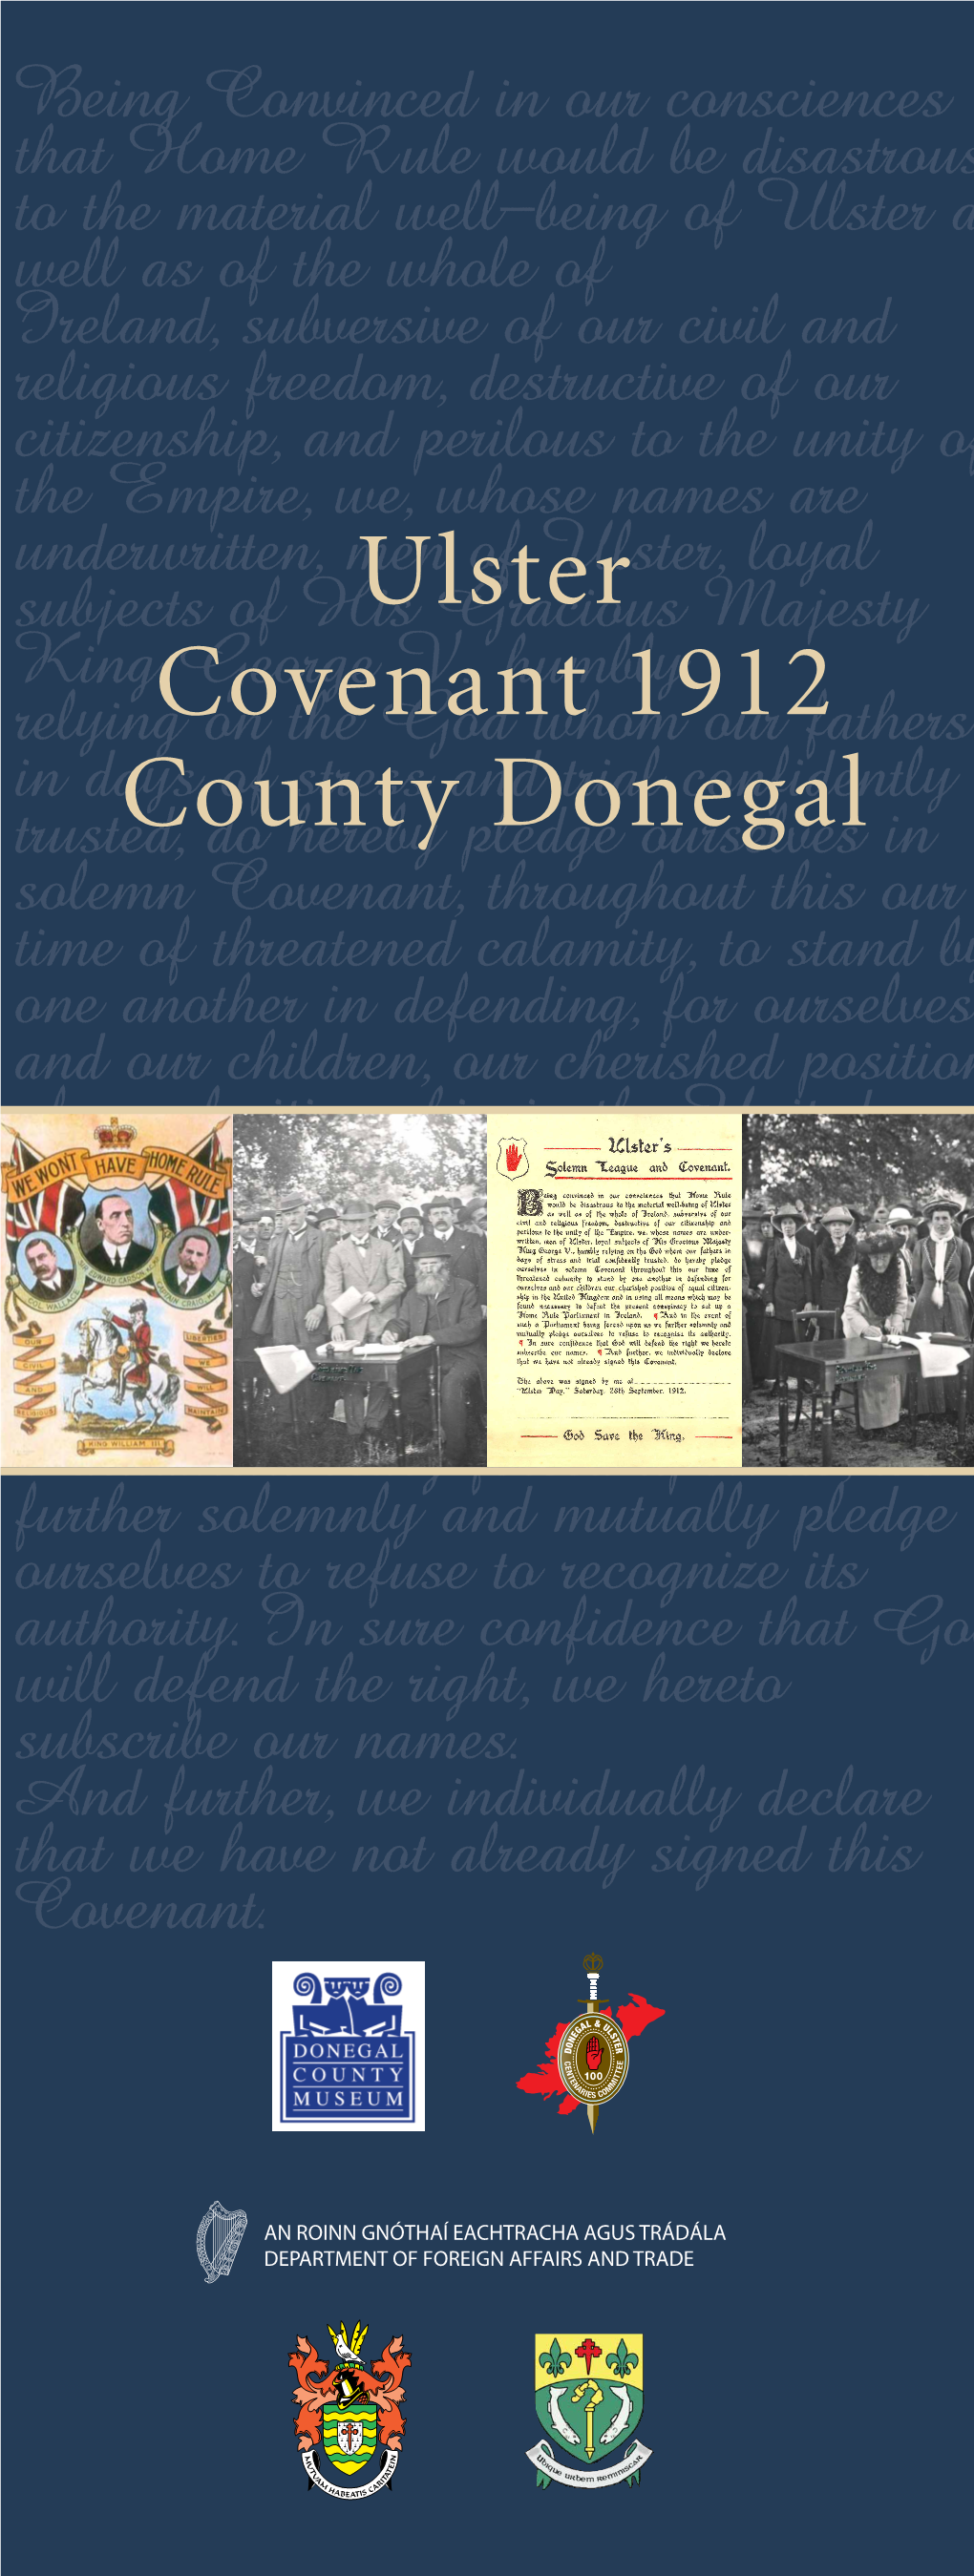 Ulster Covenant Donegal 1912 Booklet.Pdf